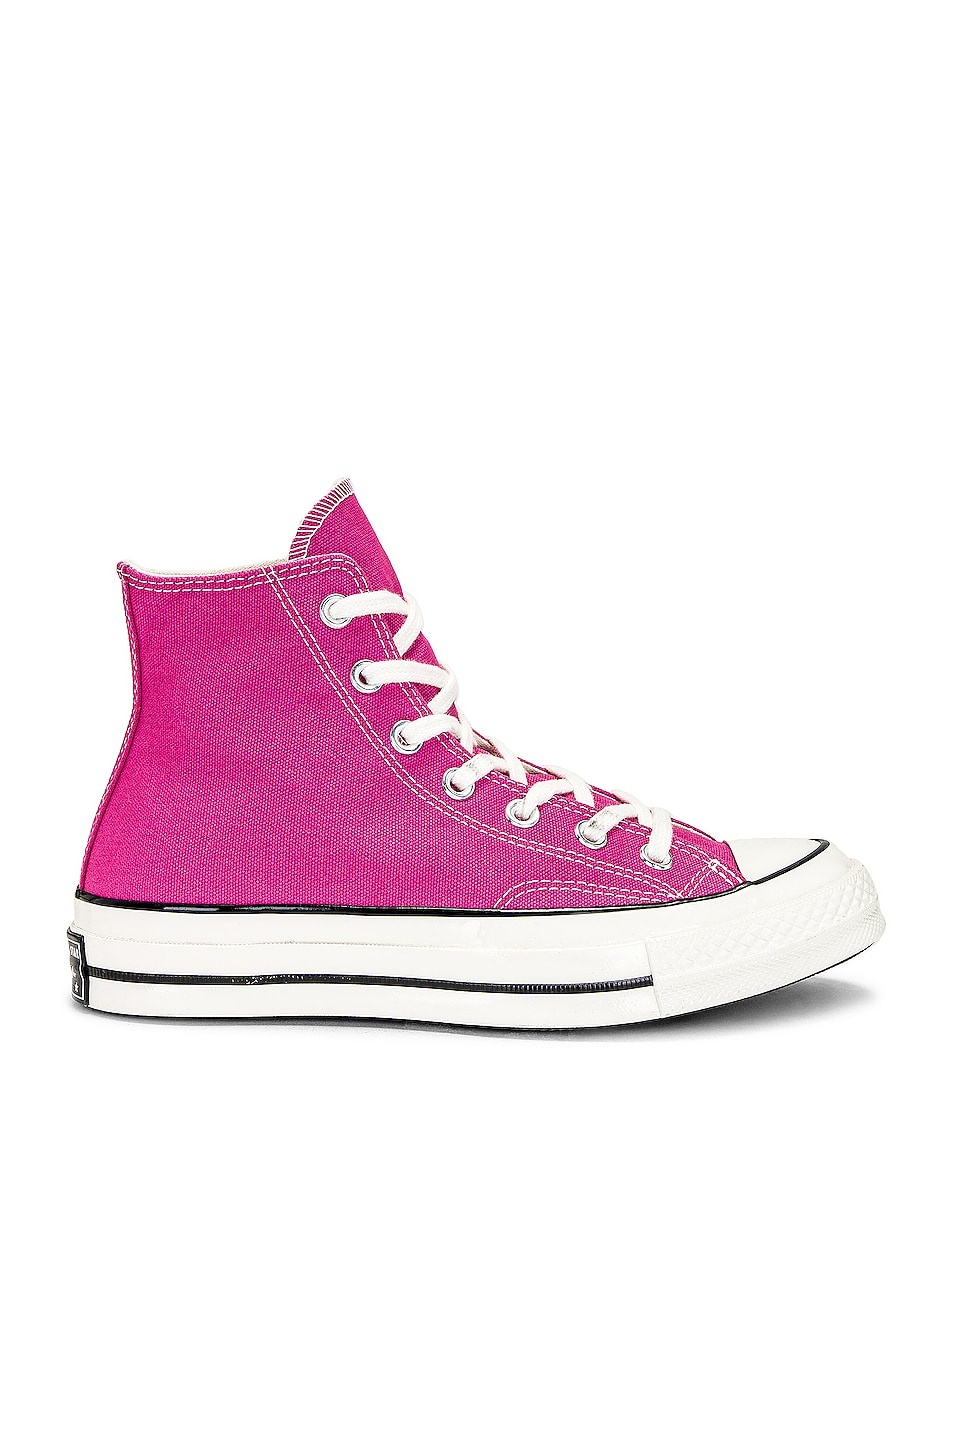 Chuck 70 Fall Tone In Lucky Pink/egret/black - 1